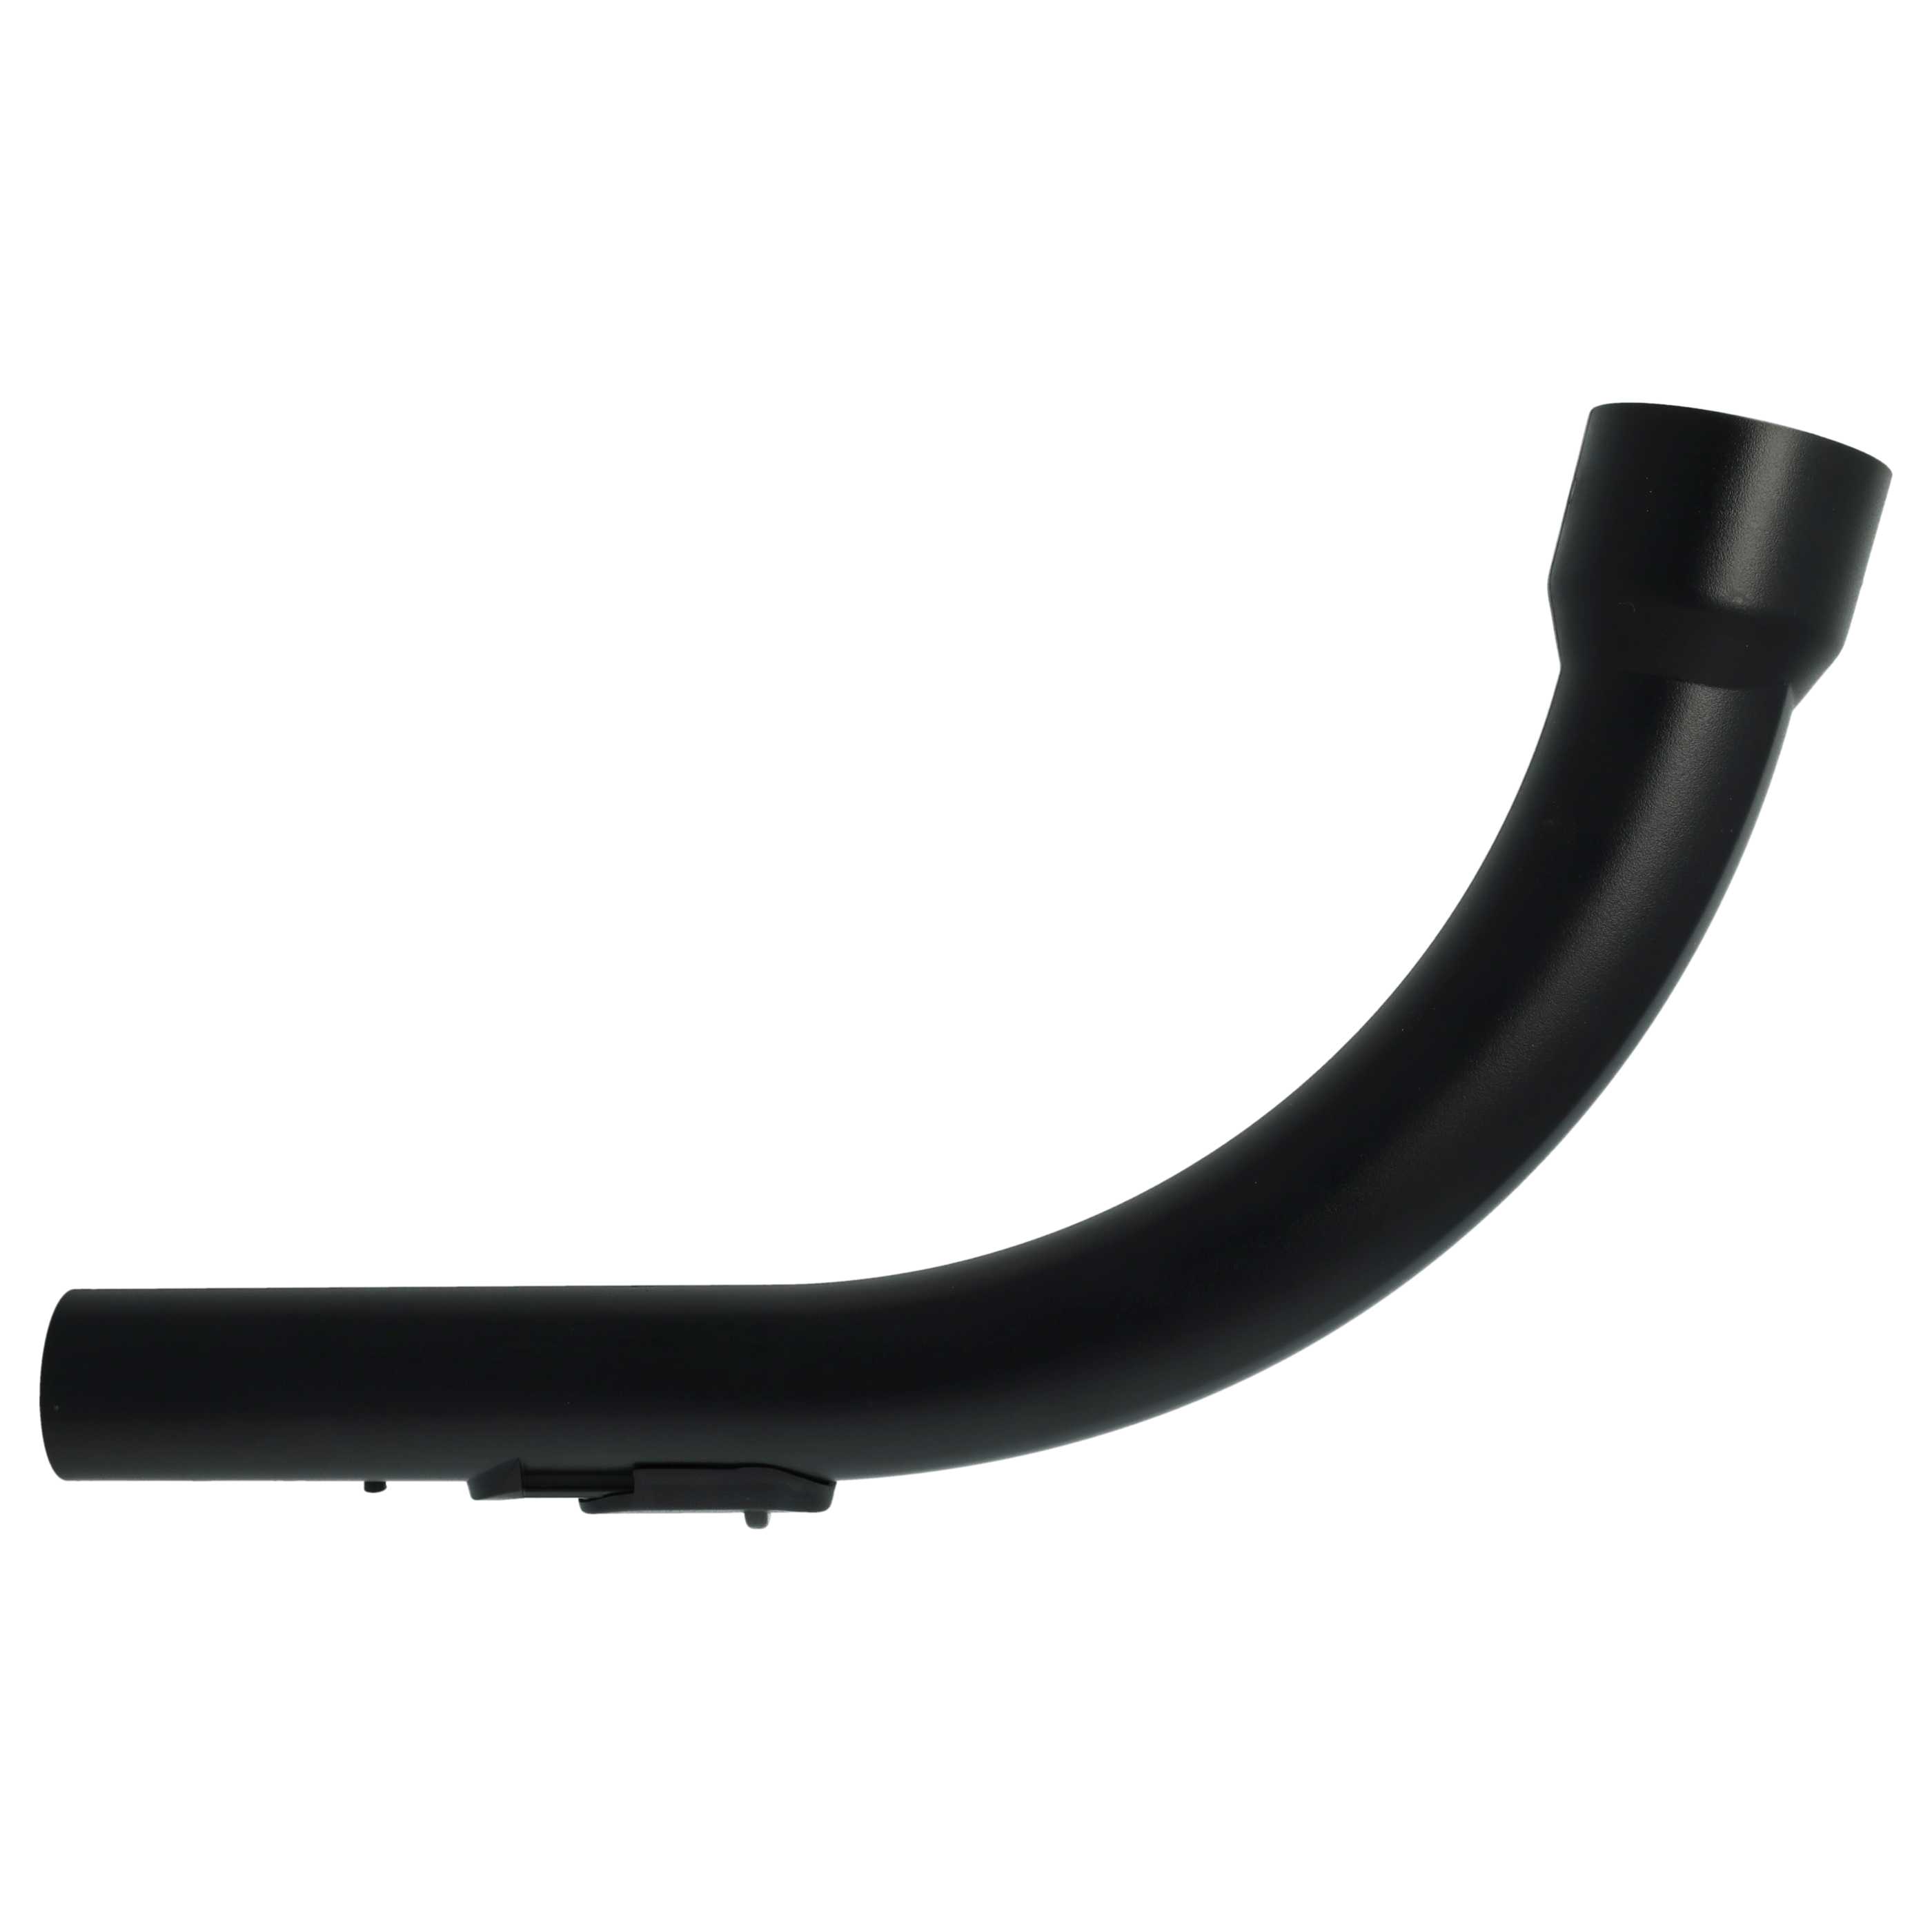 3x Vacuum Cleaner Handle as Replacement for Miele Vacuum Cleaner Handle 52690919442601 35 mm Diameter